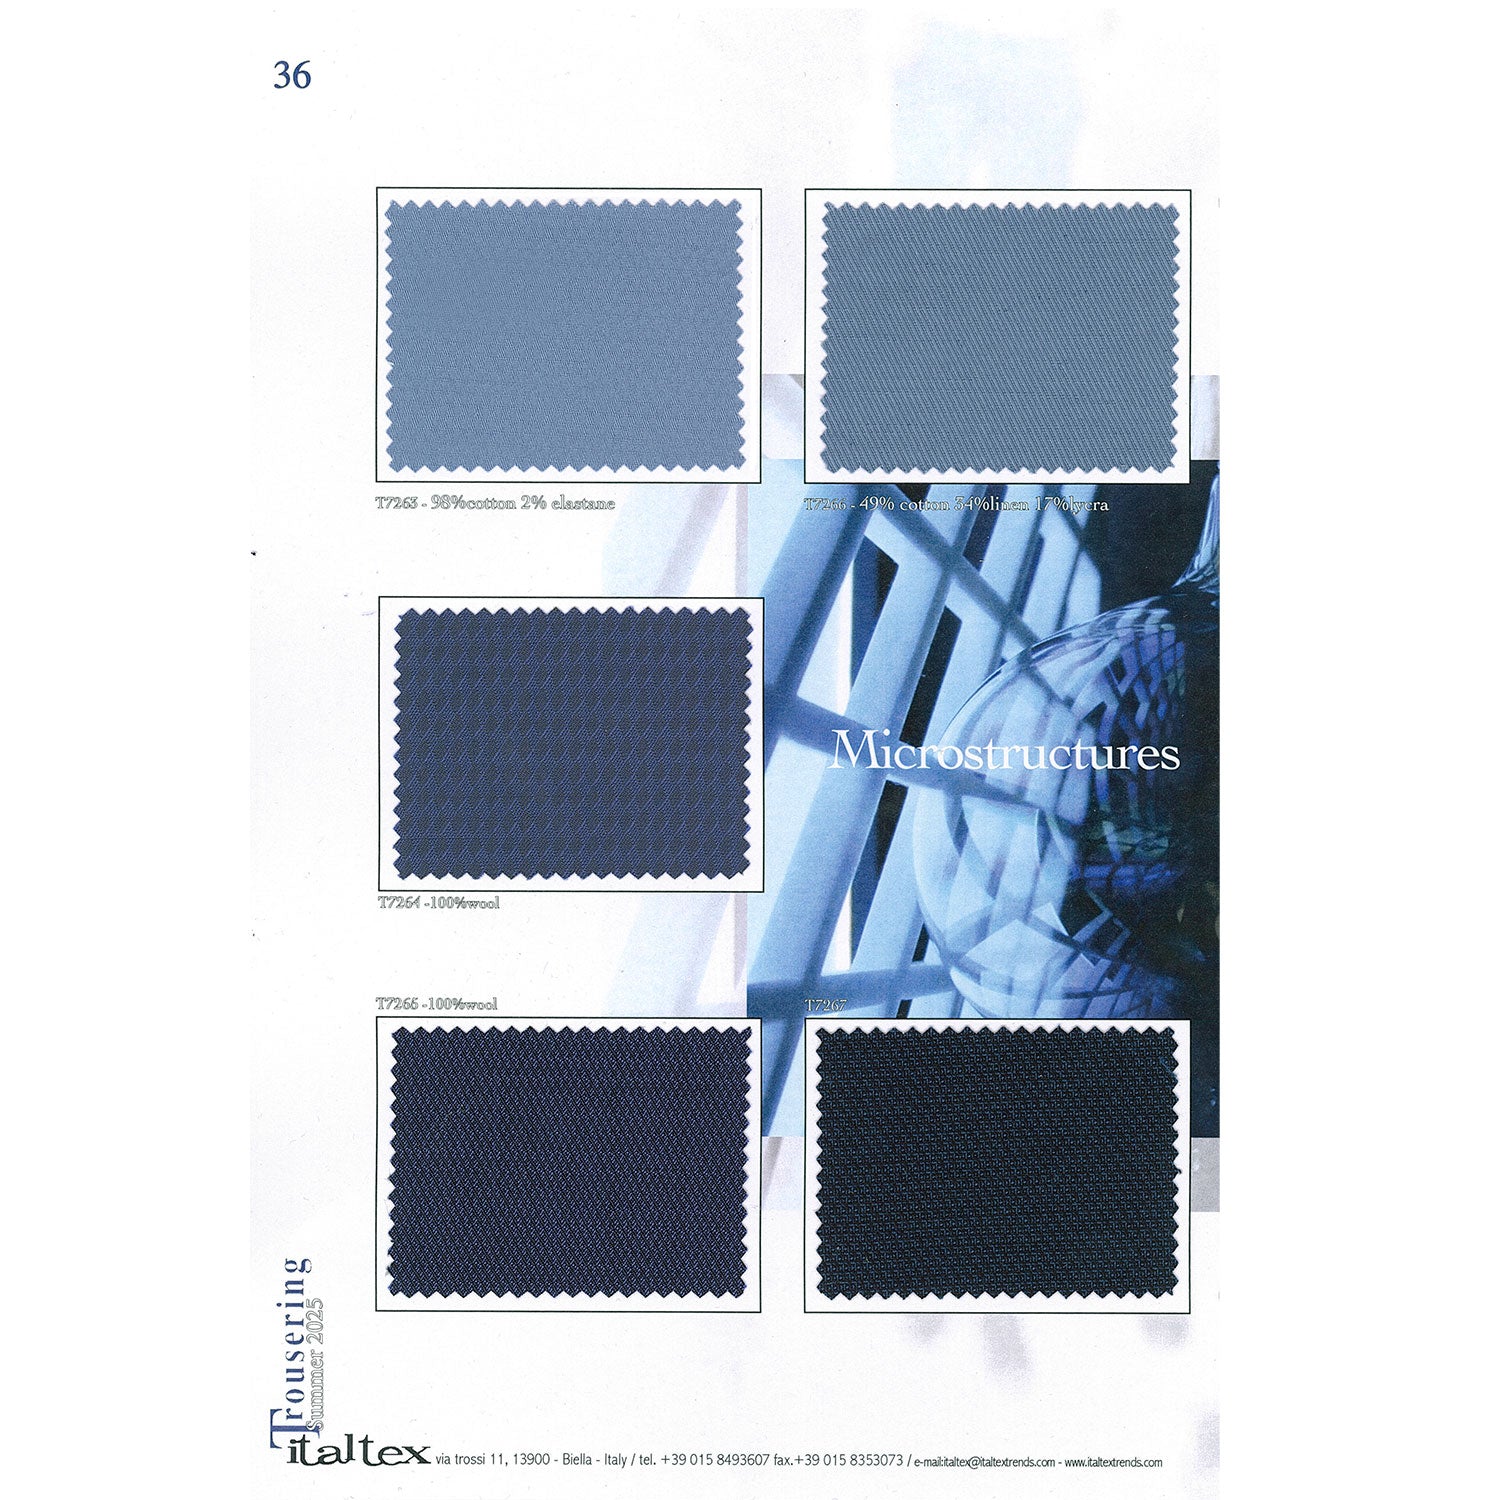 Five blue fabric swatches for pants. One light blue cotton and elastane in a tiny effect. One cotton, linen and elastane in a diagonal structure. One medium blue in a little fancy diamond pattern. One medium and one dark blue micropatterns